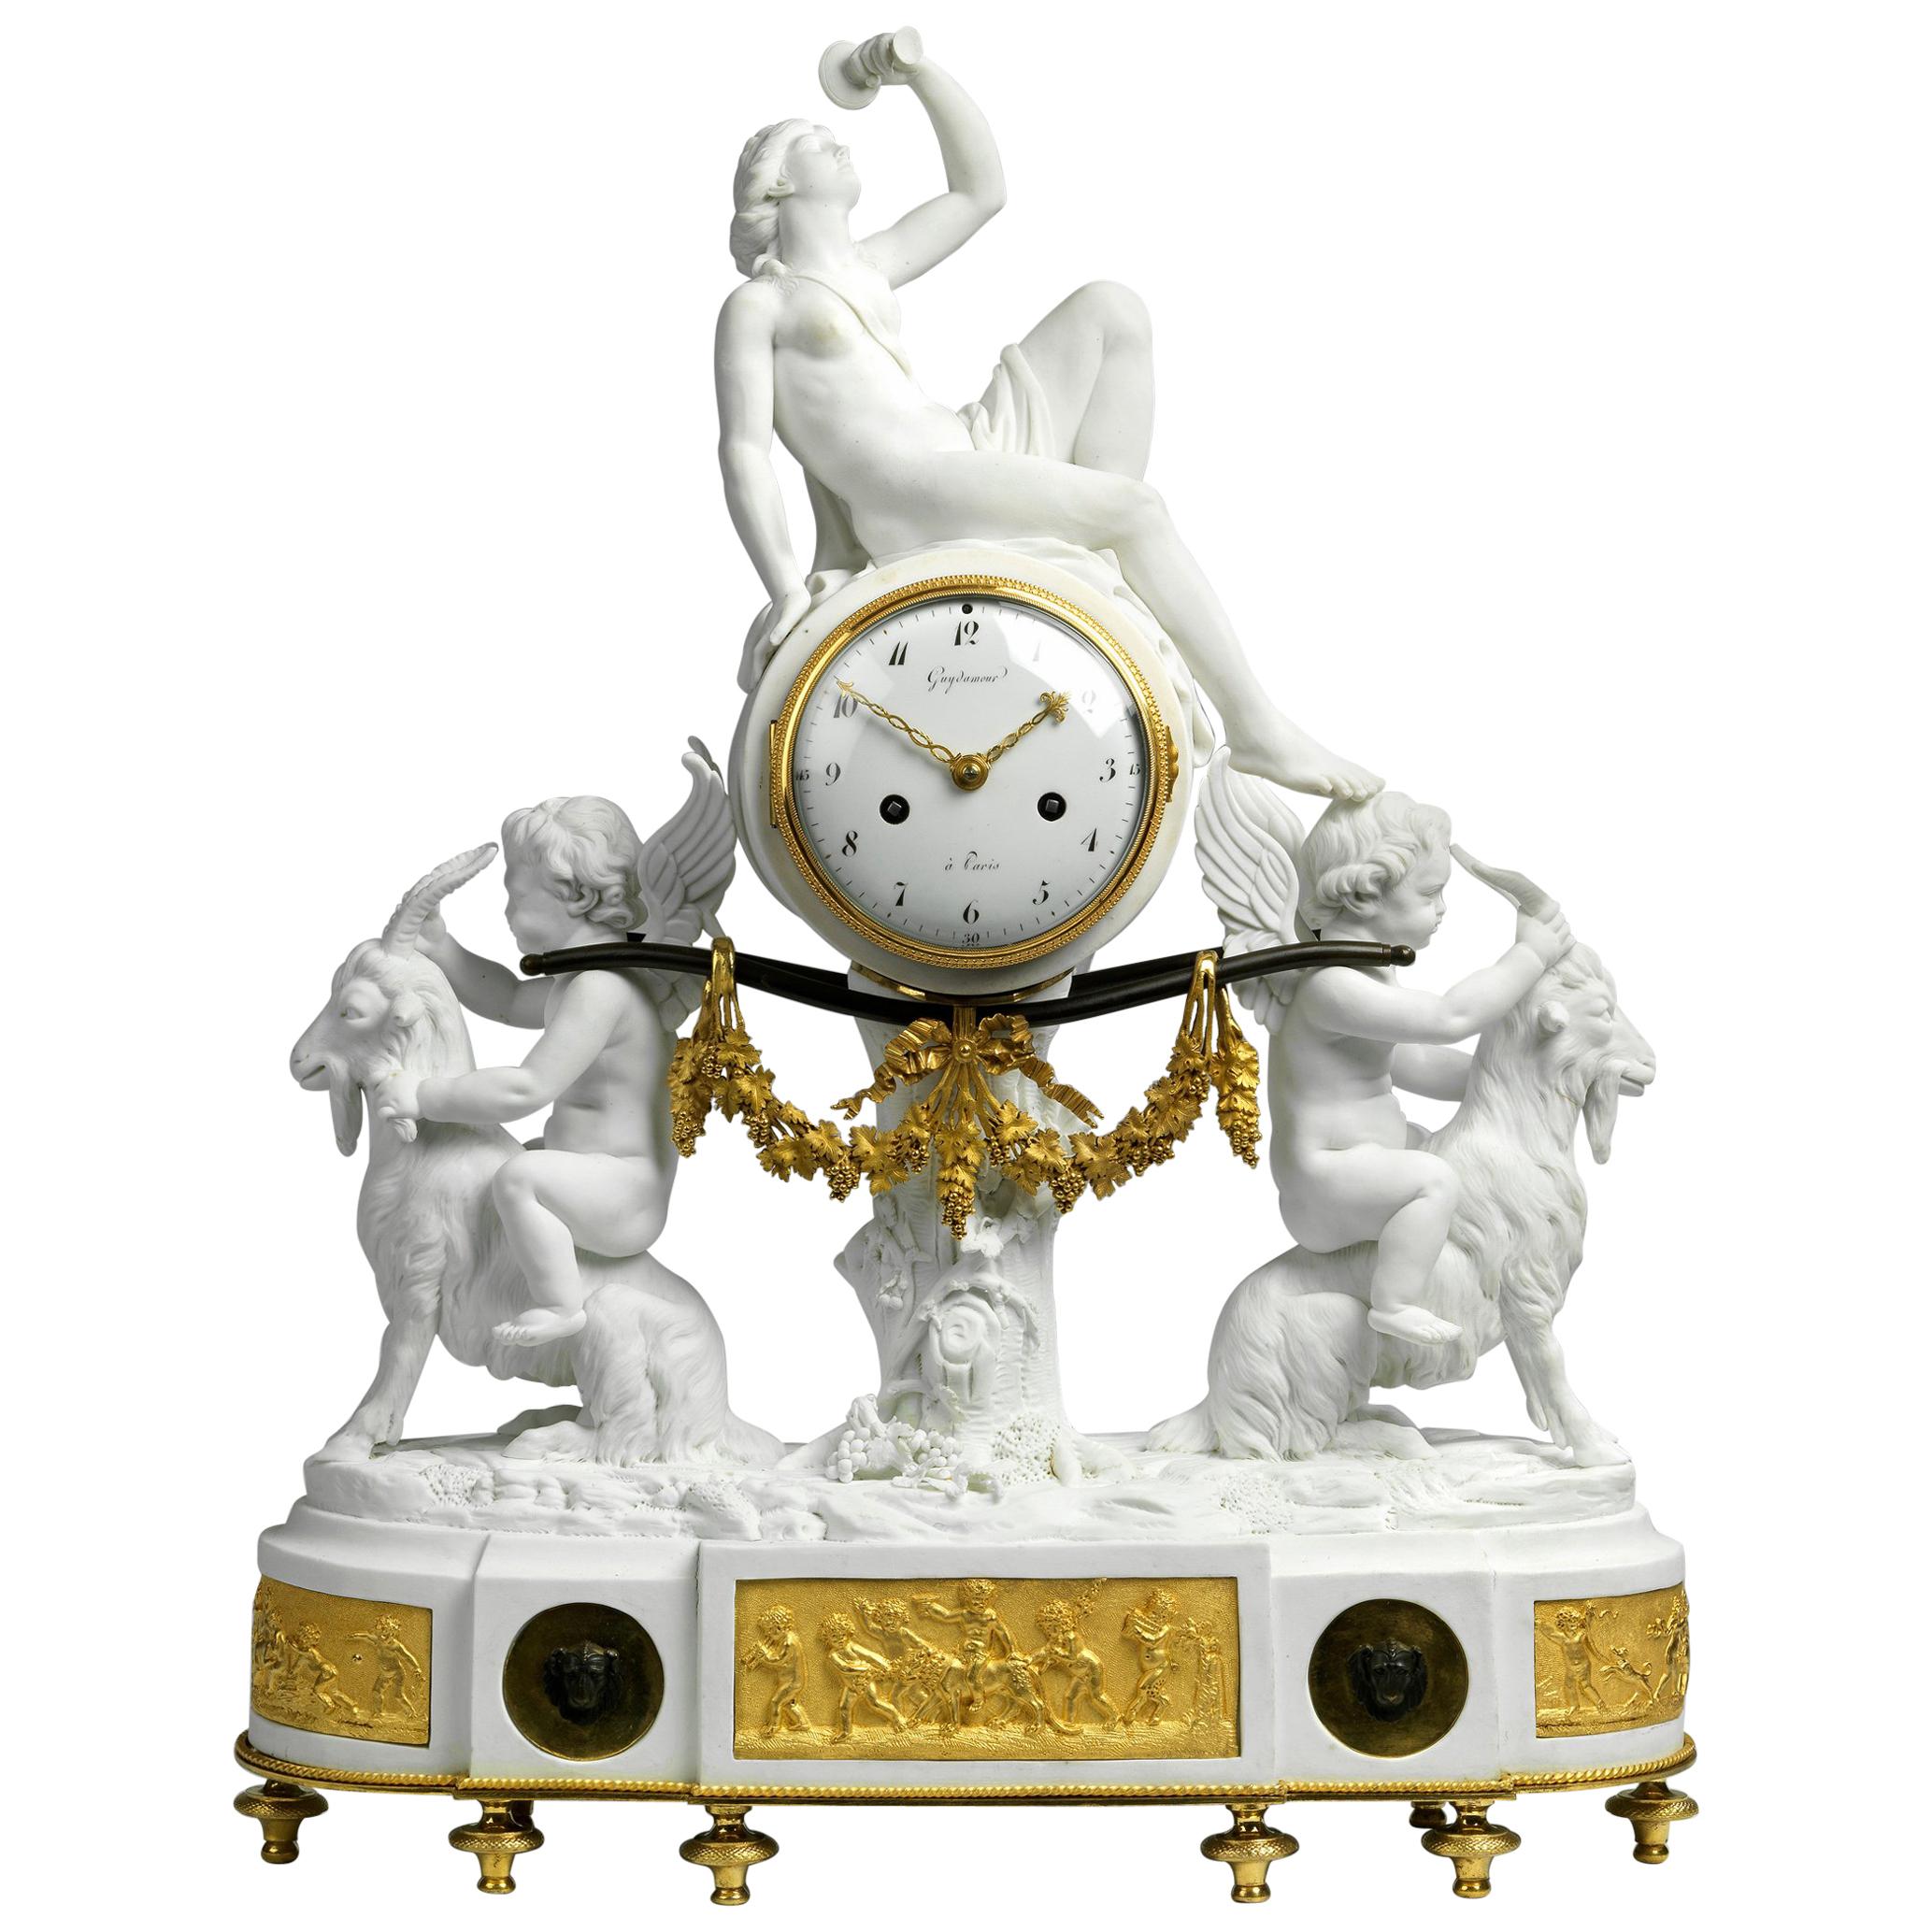 Louis XVI Ormolu and Biscuit Porcelain Mantel Clock by Guydamour For Sale